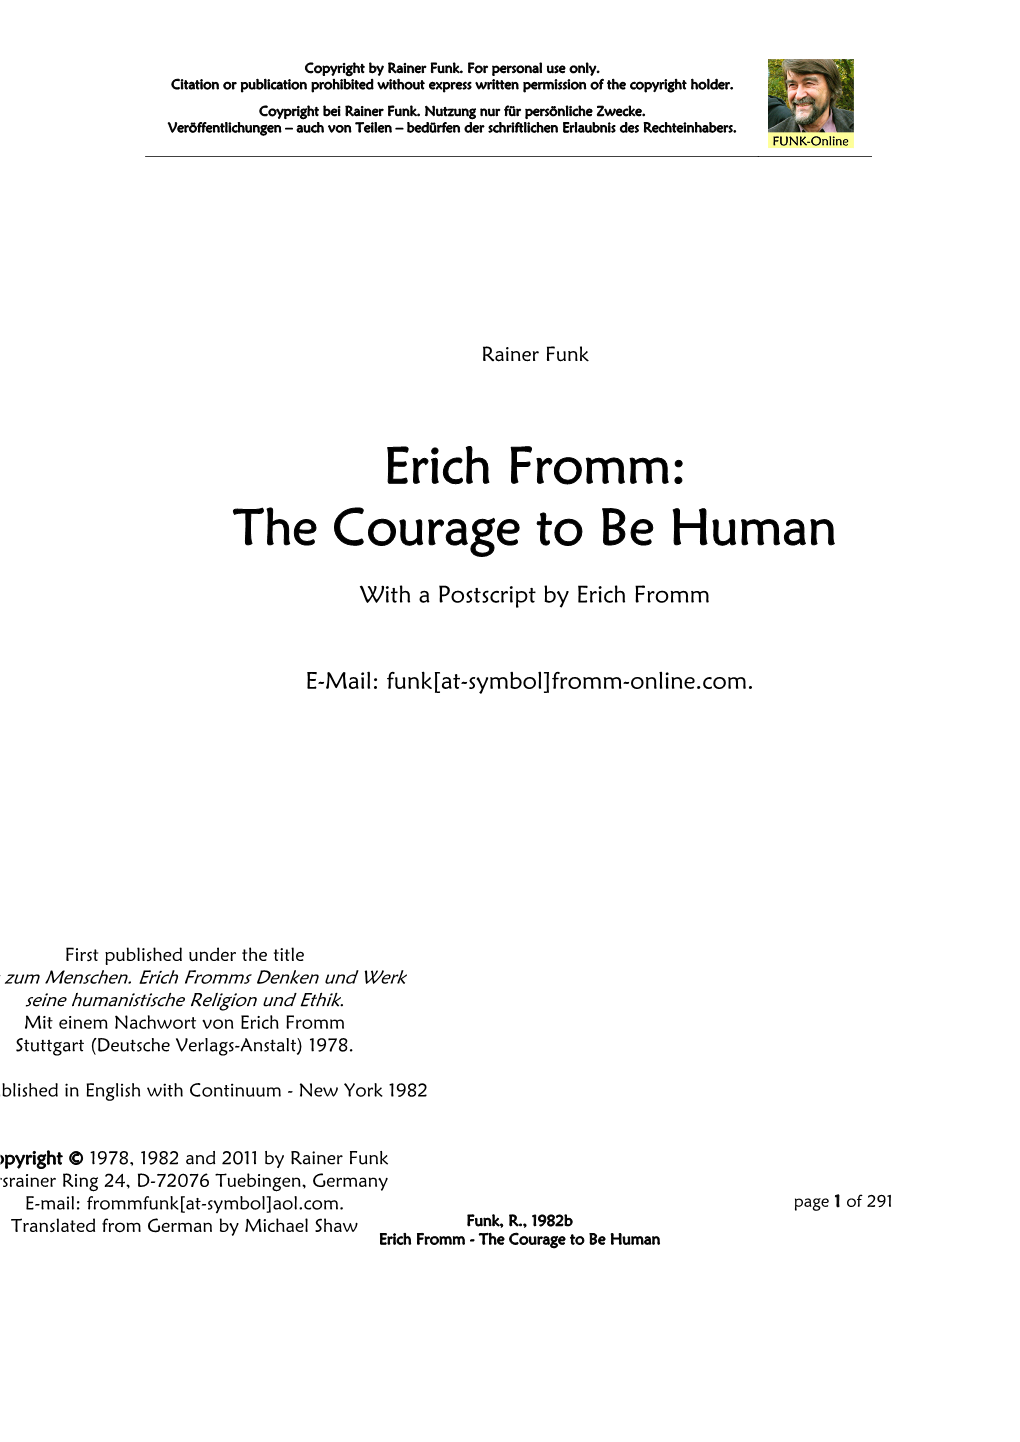 Erich Fromm: the Courage to Be Human